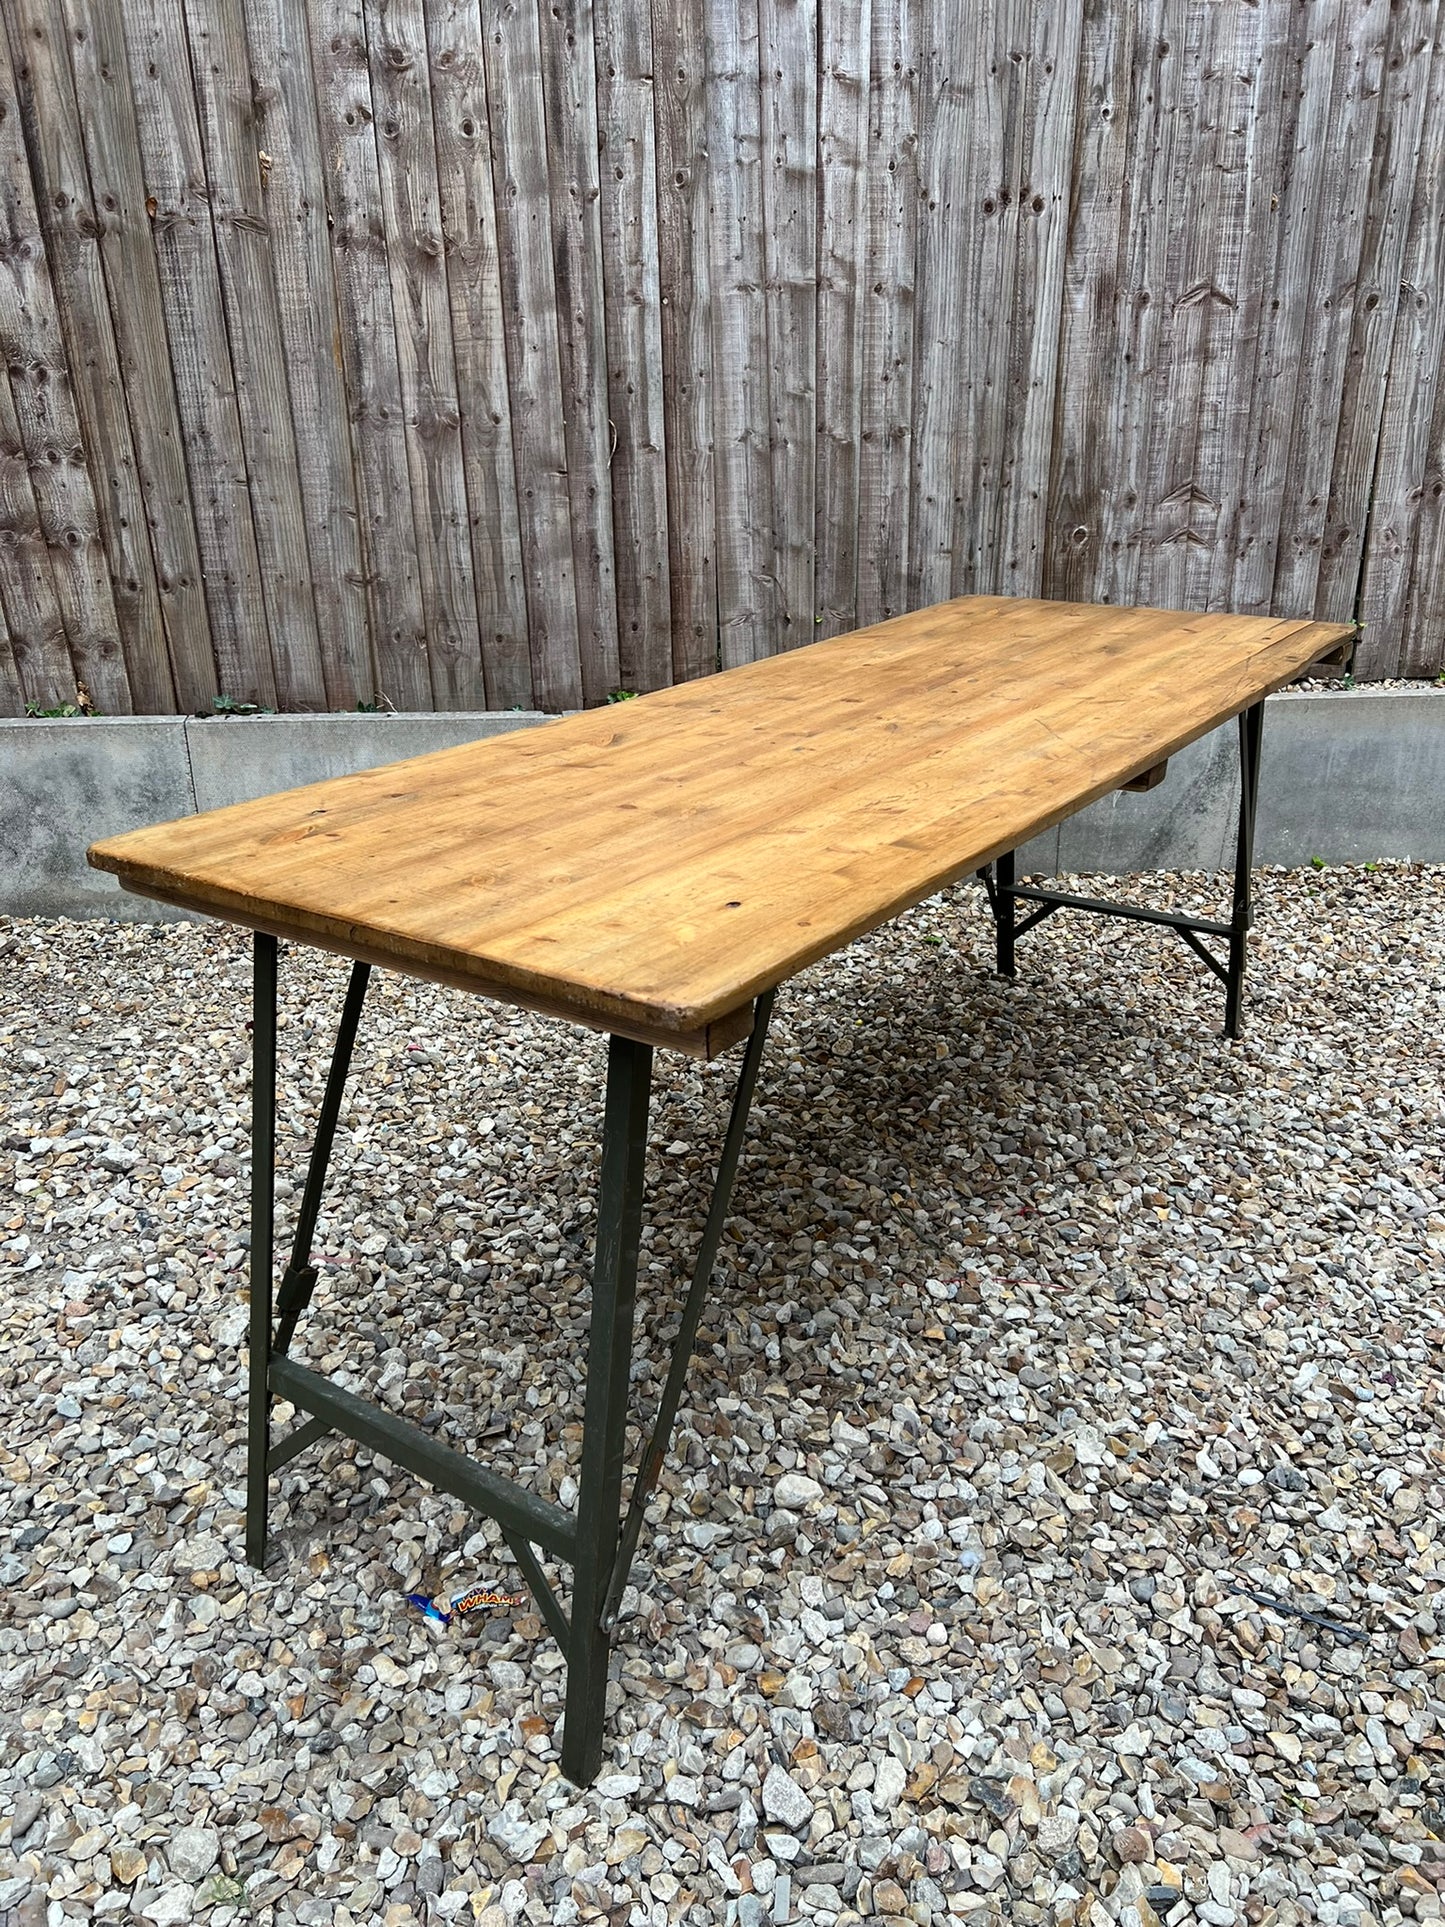 Rustic Industrial Trestle Table Wooden Folding Table Reclaimed Farmhouse Dining Ex Army Office Desk